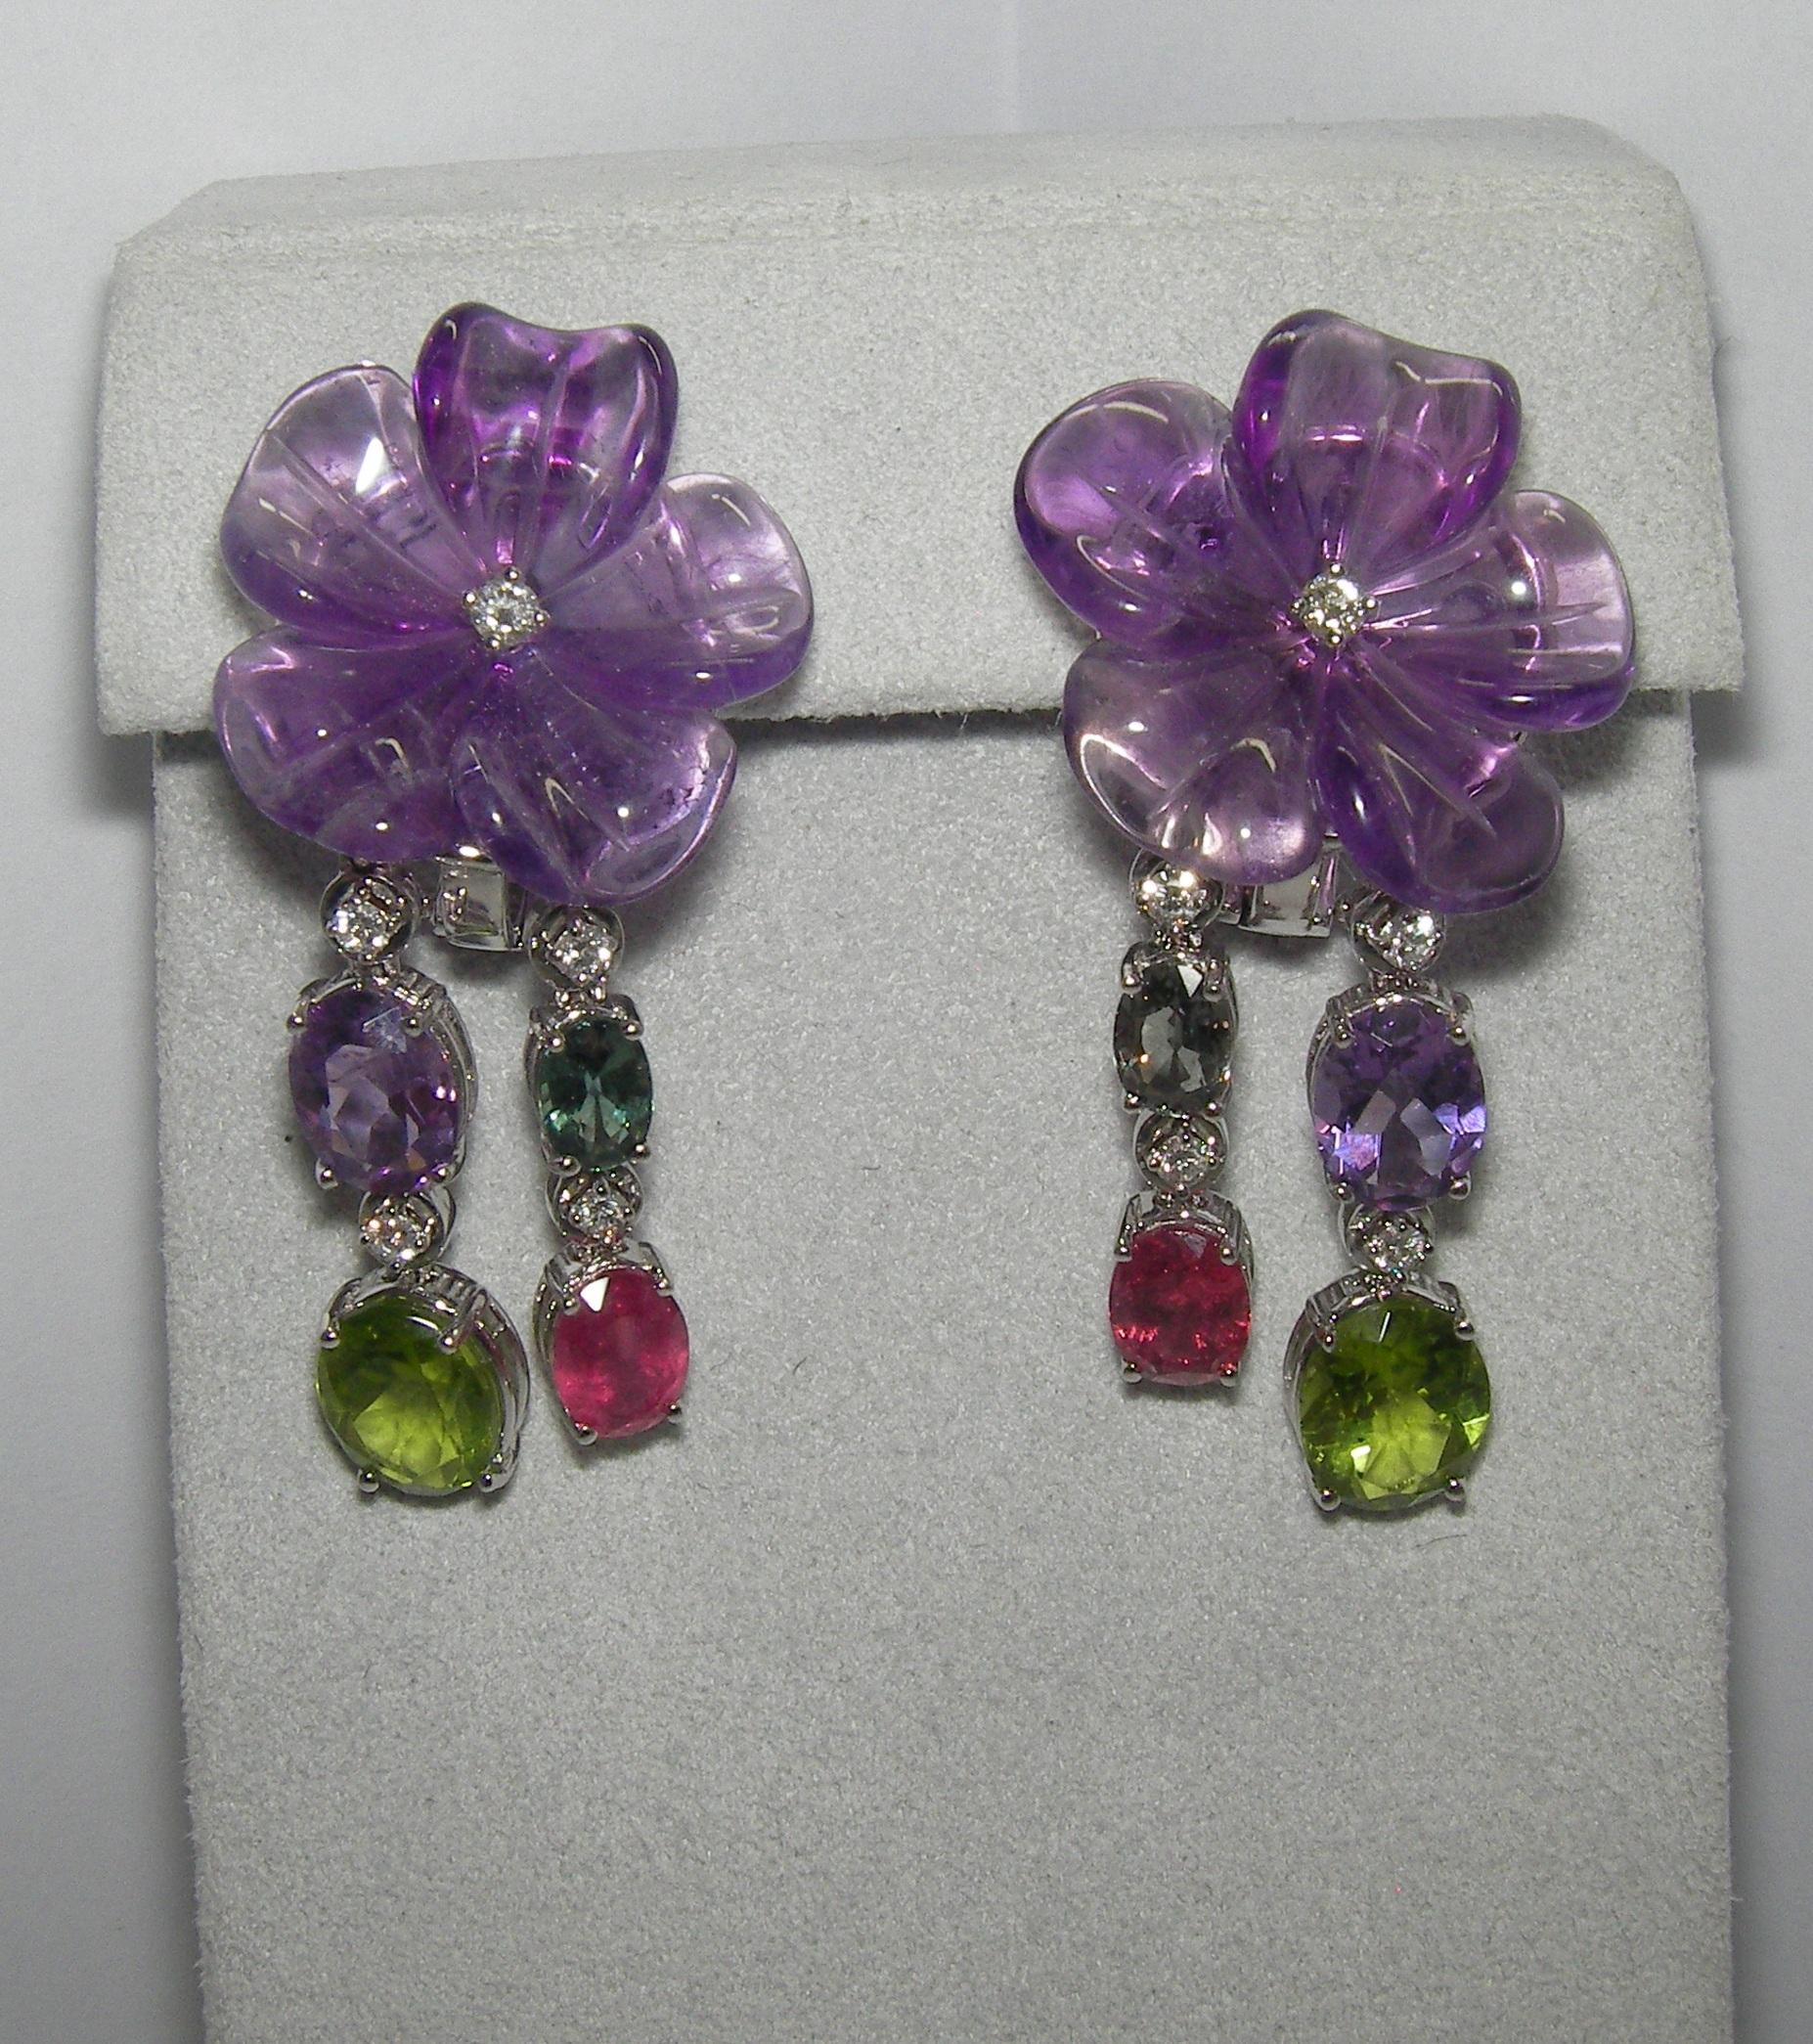 Playful and vibrant 18 Karat white gold earrings. The flower petals are carved out of one entire Amethyst stone. The dropping strands consist of Amethyst, Red Tourmaline, Green Sapphire and Peridot. Each vivid gemstone is elegantly divided with